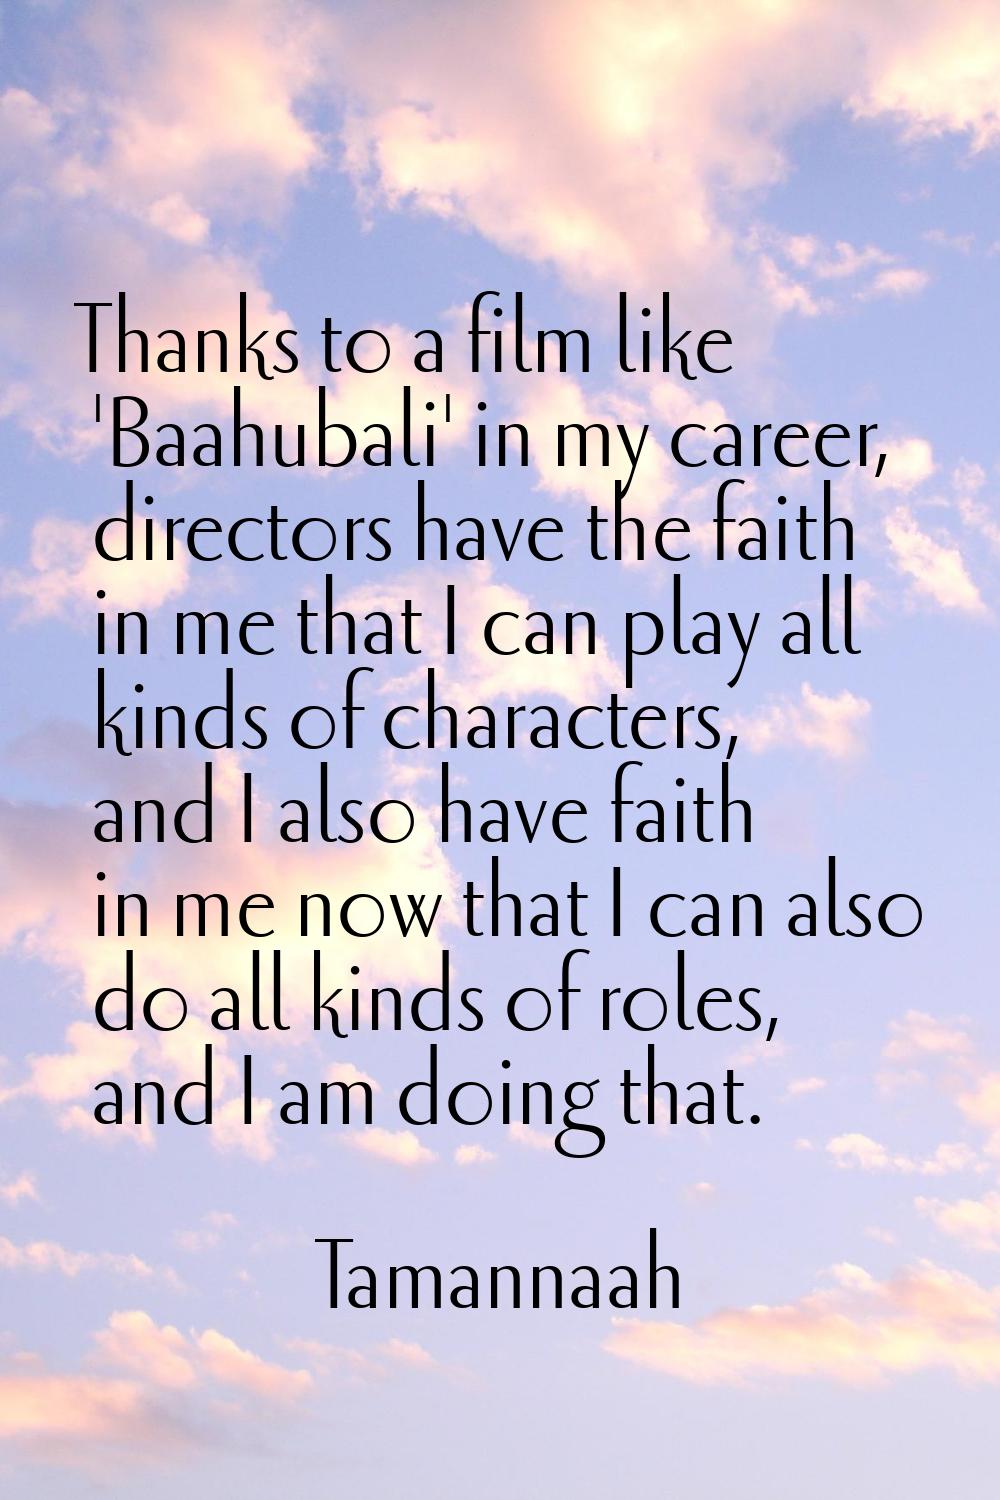 Thanks to a film like 'Baahubali' in my career, directors have the faith in me that I can play all 